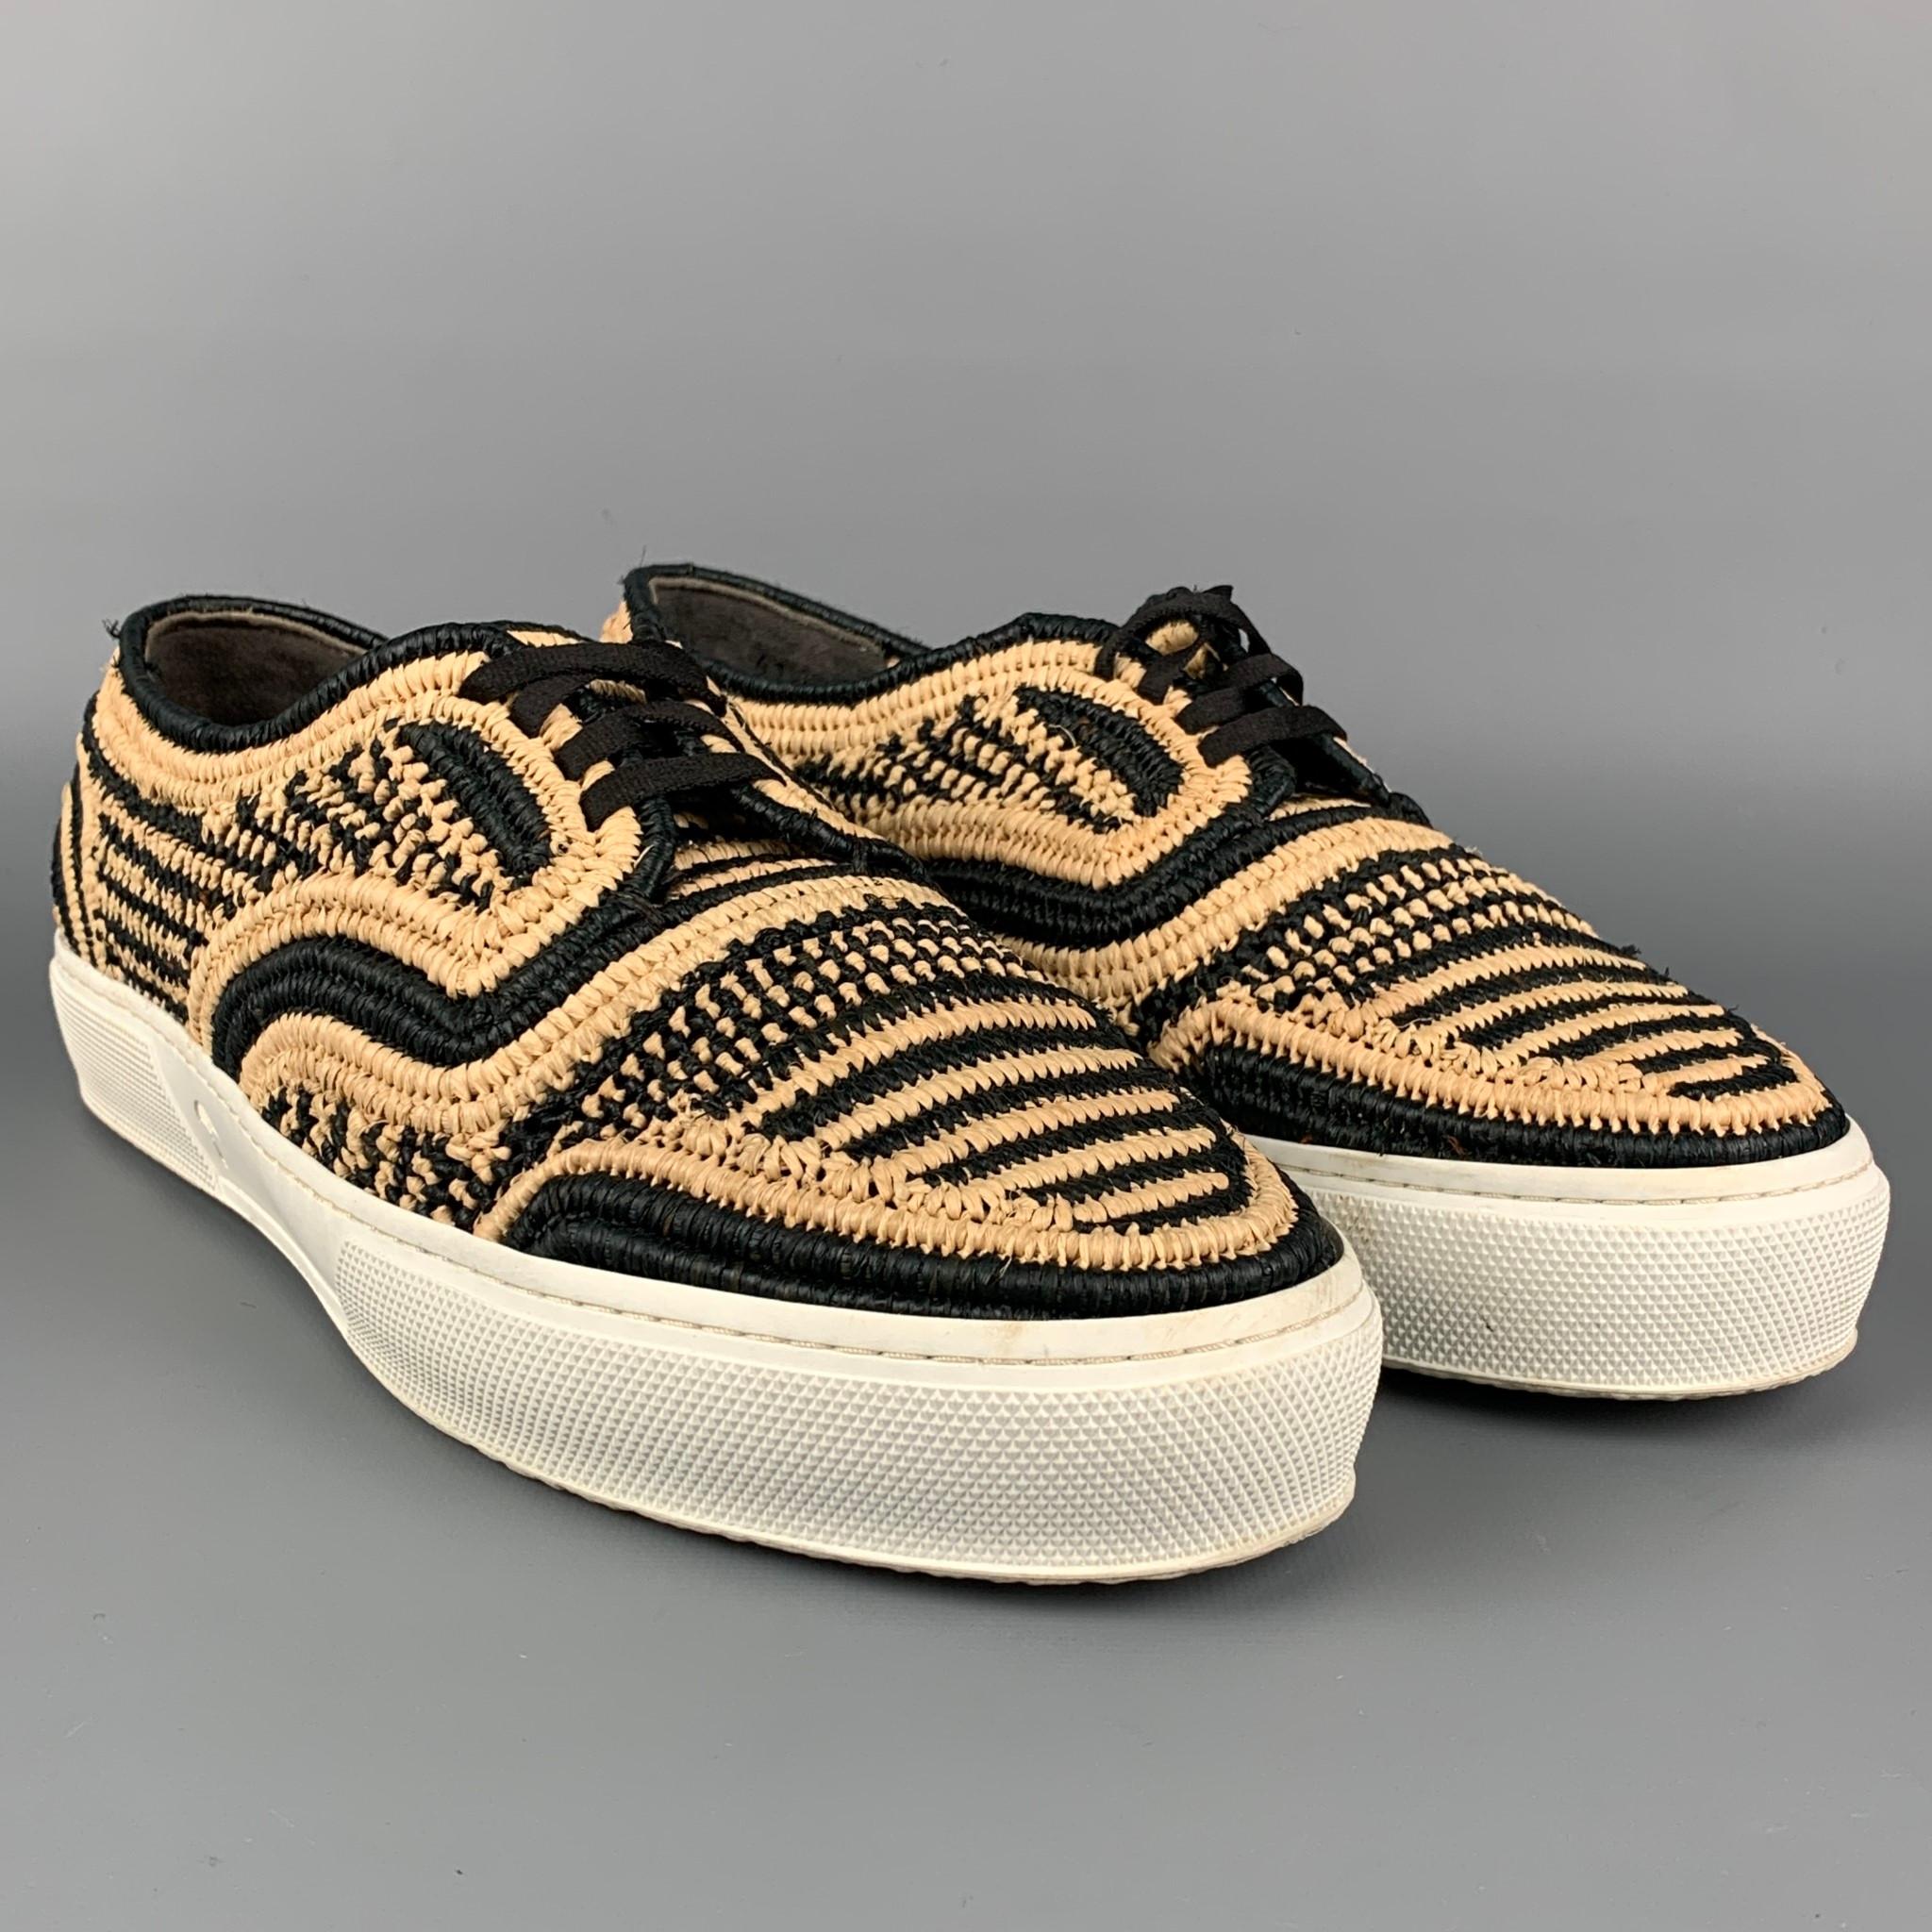 ROBERT CLERGERIE sneakers comes in a black & natural wove material featuring a rubber sole and a lace up closure. 

Excellent Pre-Owned Condition.
Marked: 41

Outsole: 11 in. x 3.75 in. 